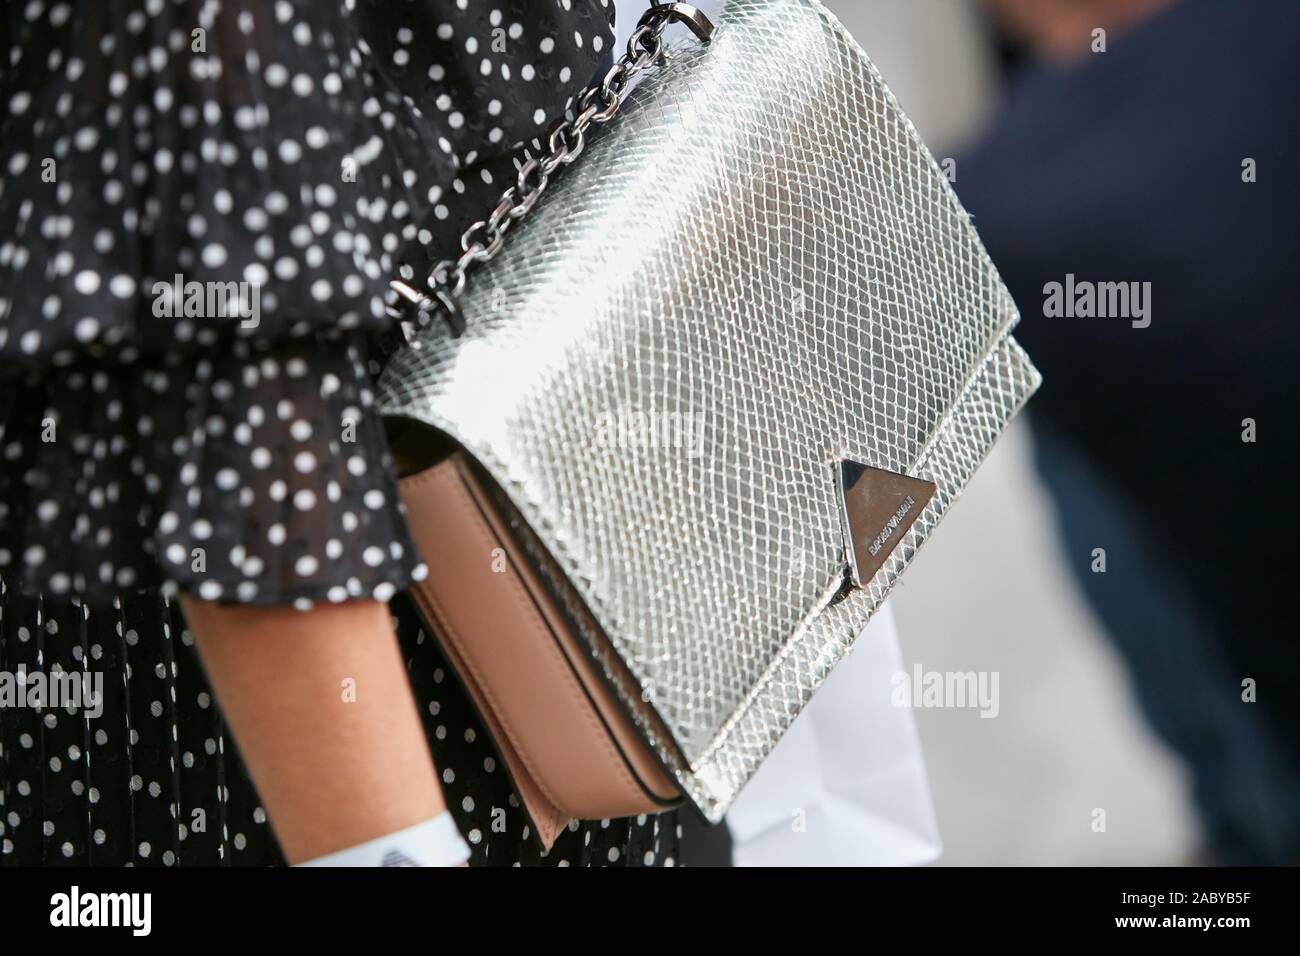 MILAN, ITALY - SEPTEMBER 19, 2019: Woman with Emporio Armani silver reptile leather bag and black and white polka dot dress before Emporio Armani fash Stock Photo